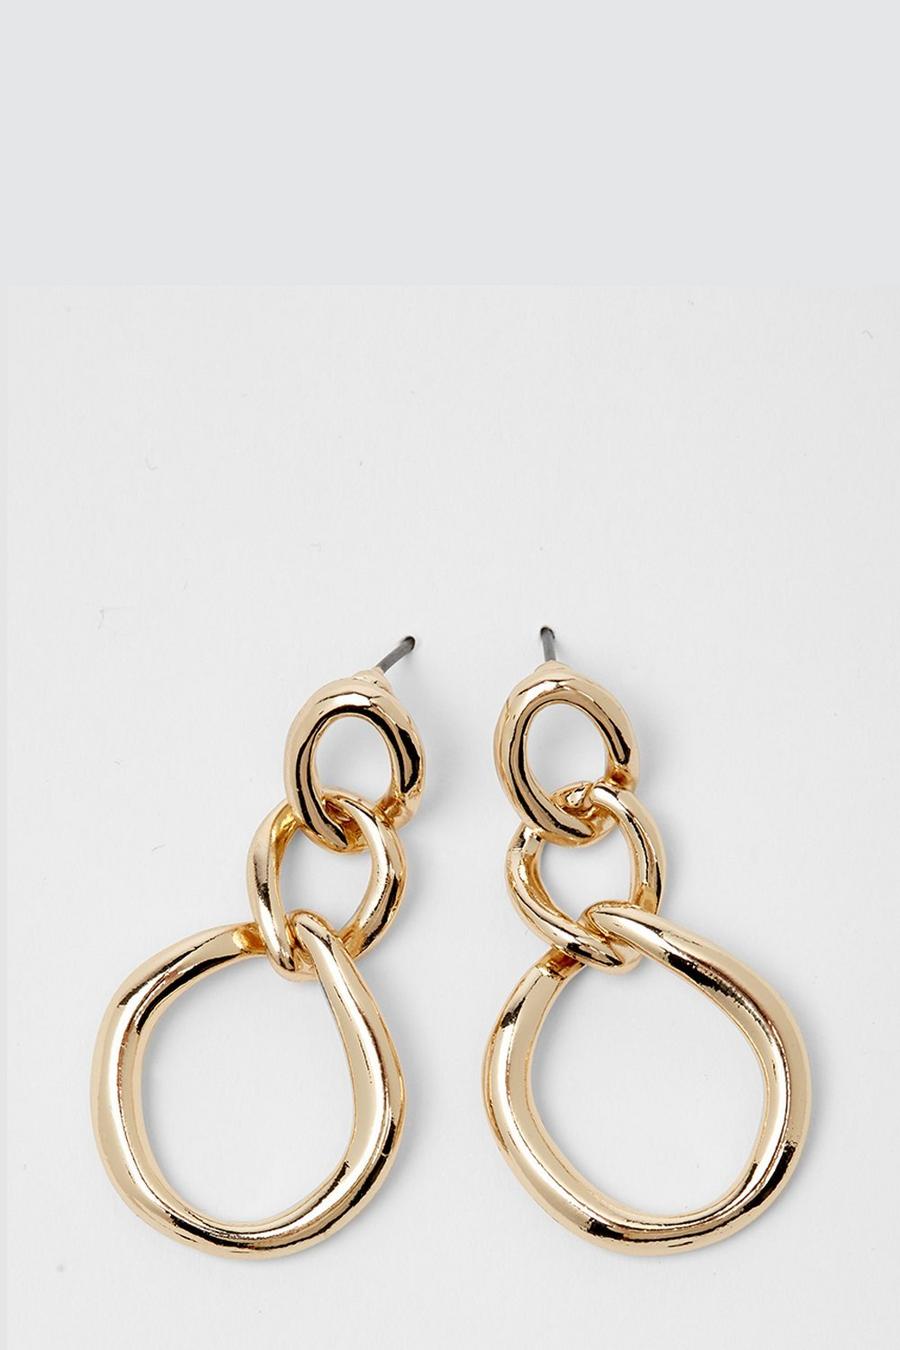 Gold Link Chain Style Earrings